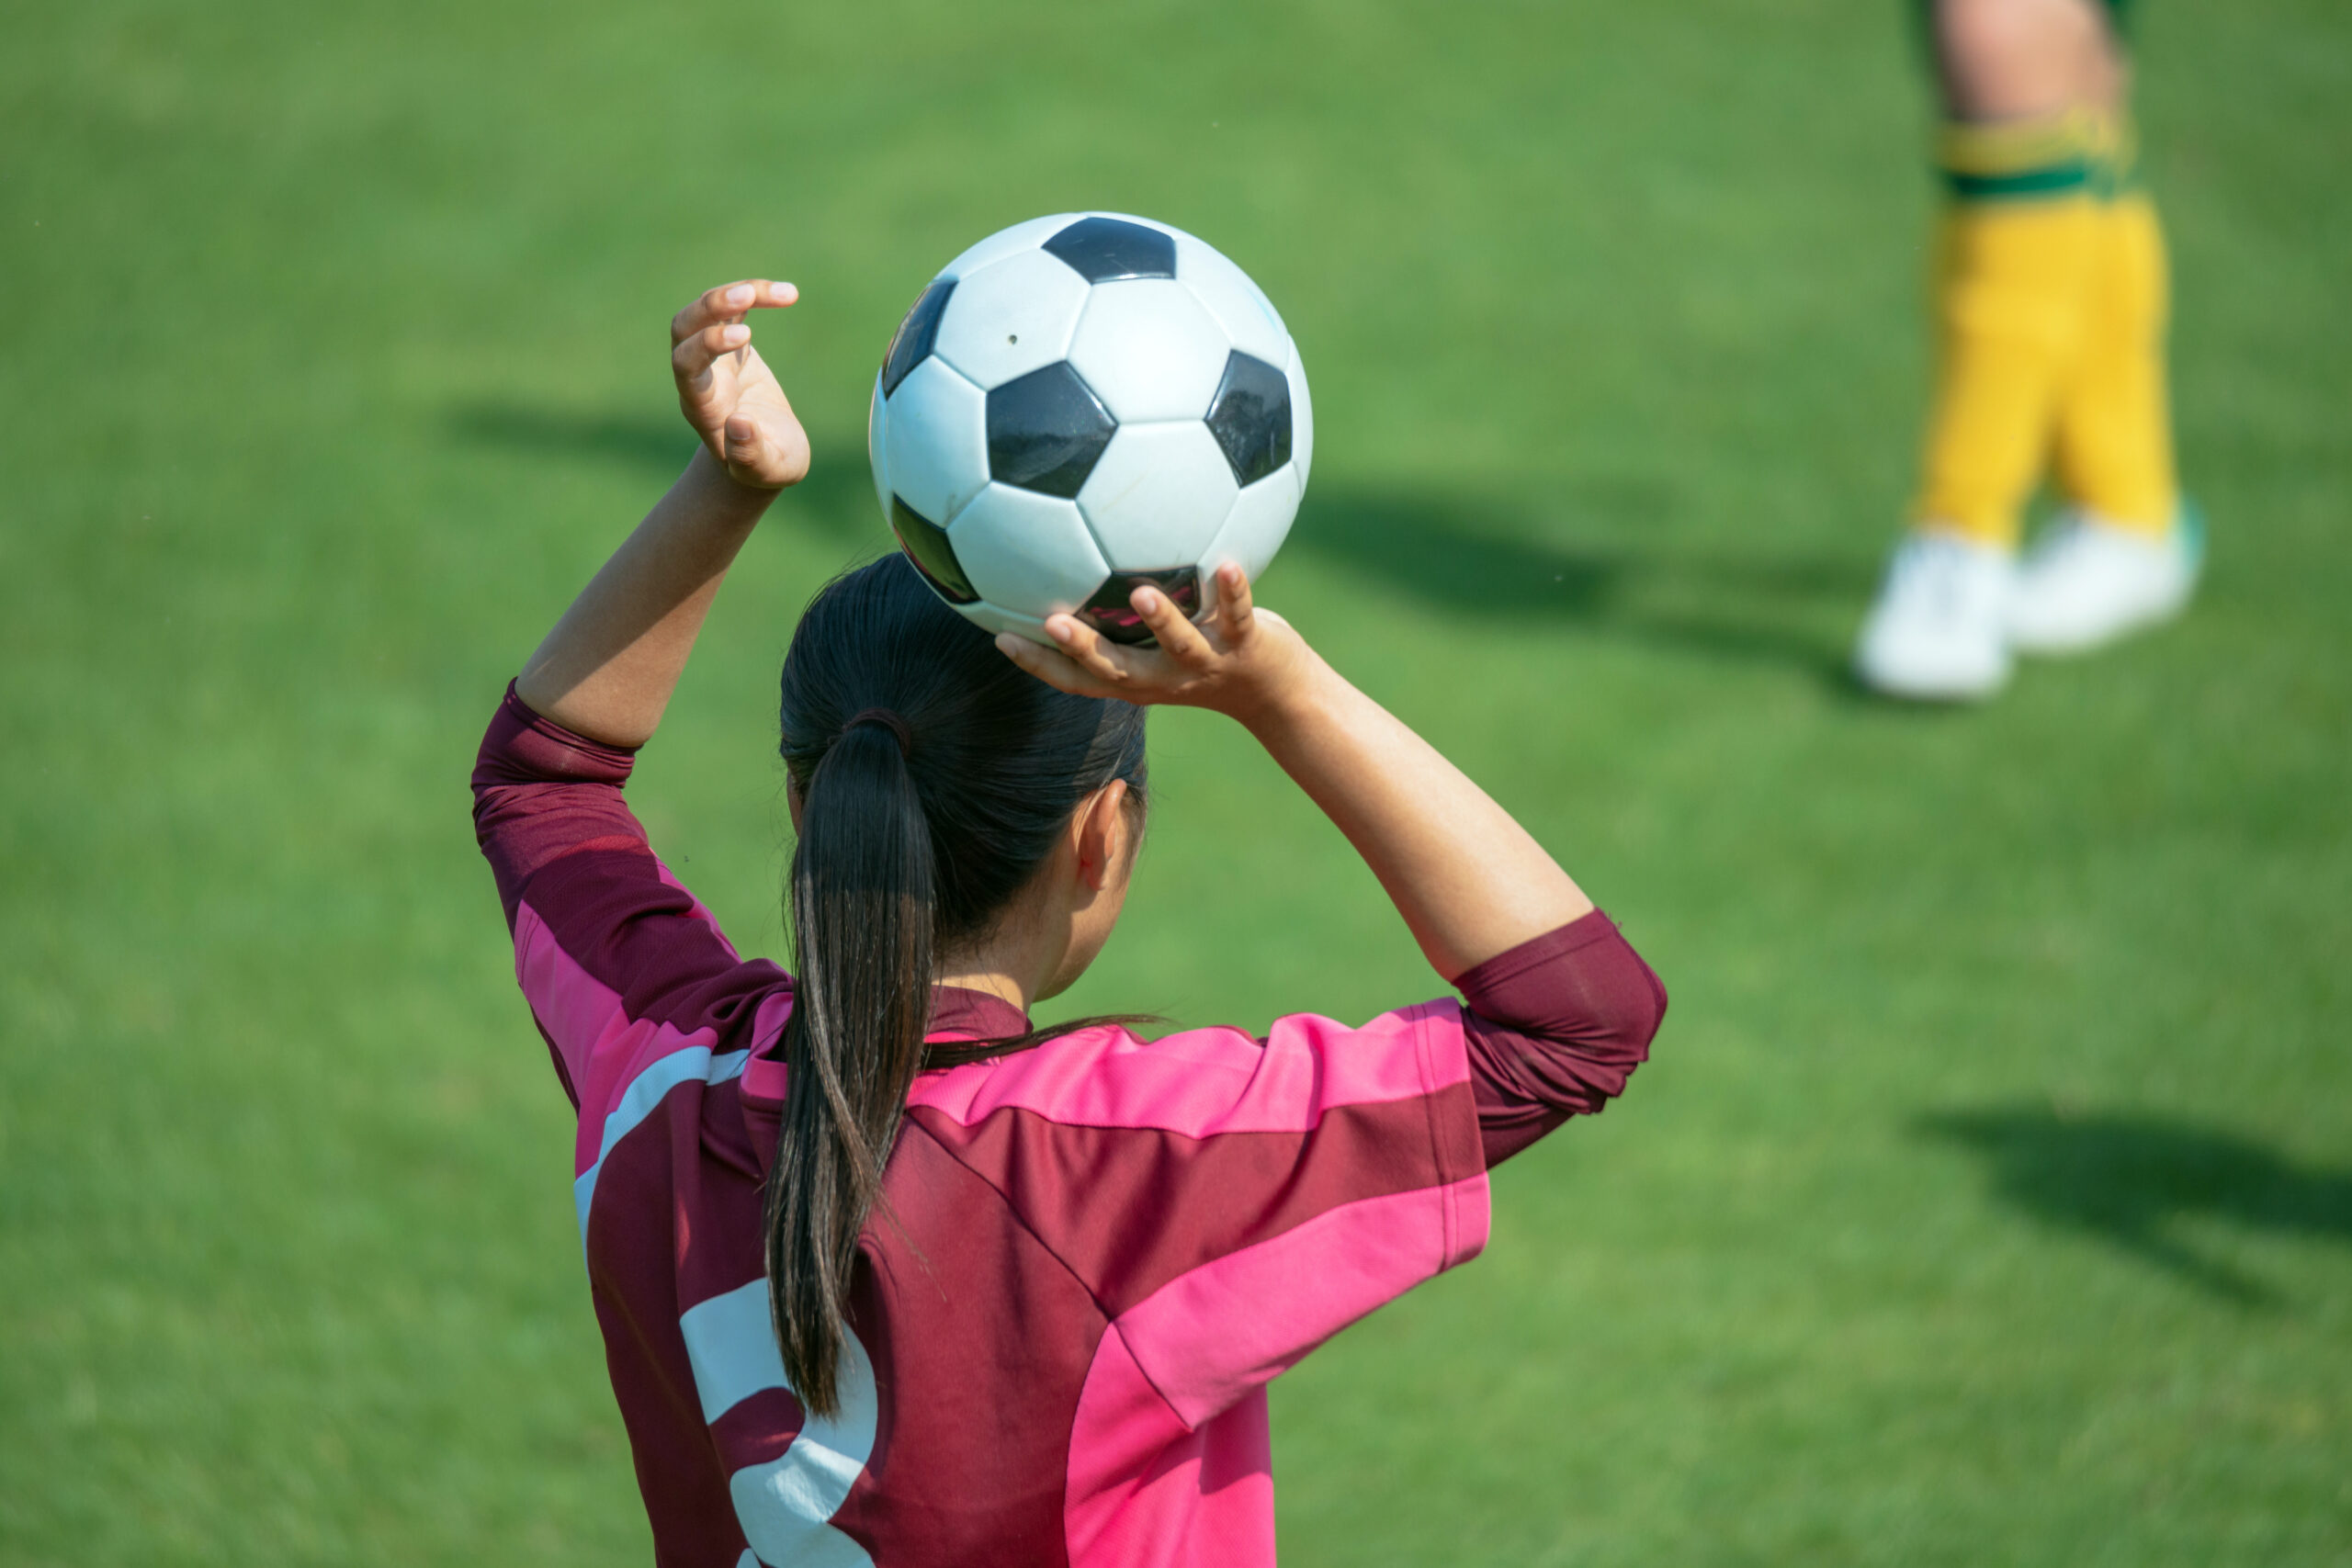 Young female soccer player throwing in a ball